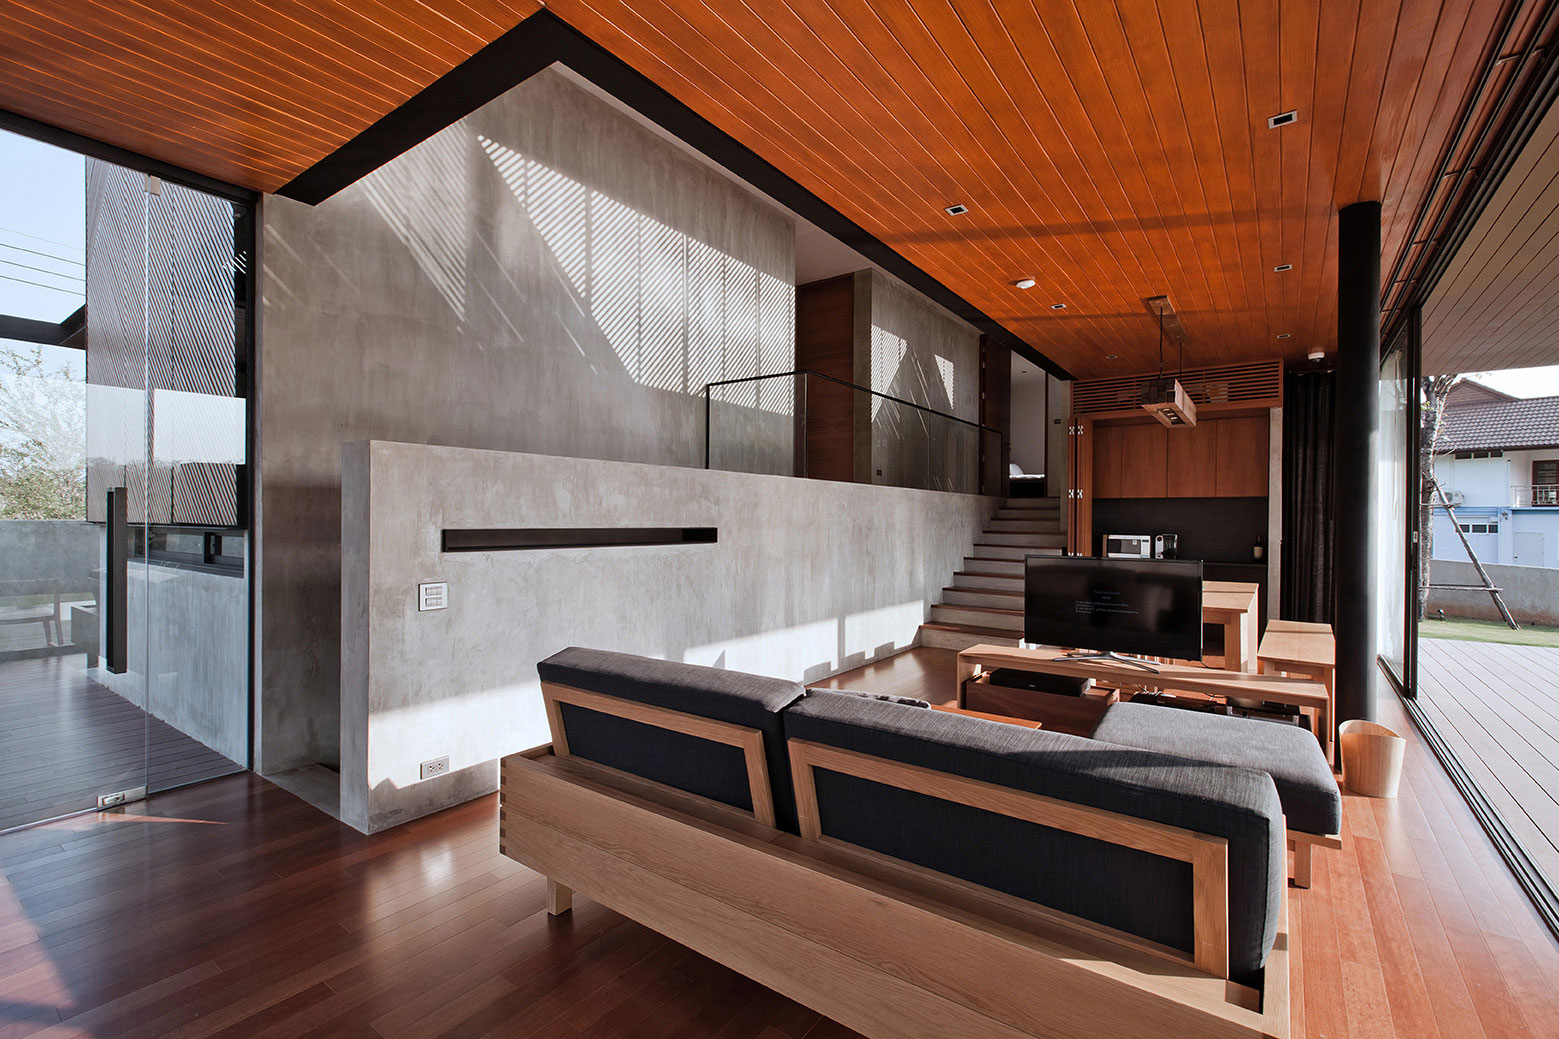 living room made by concrete and wood